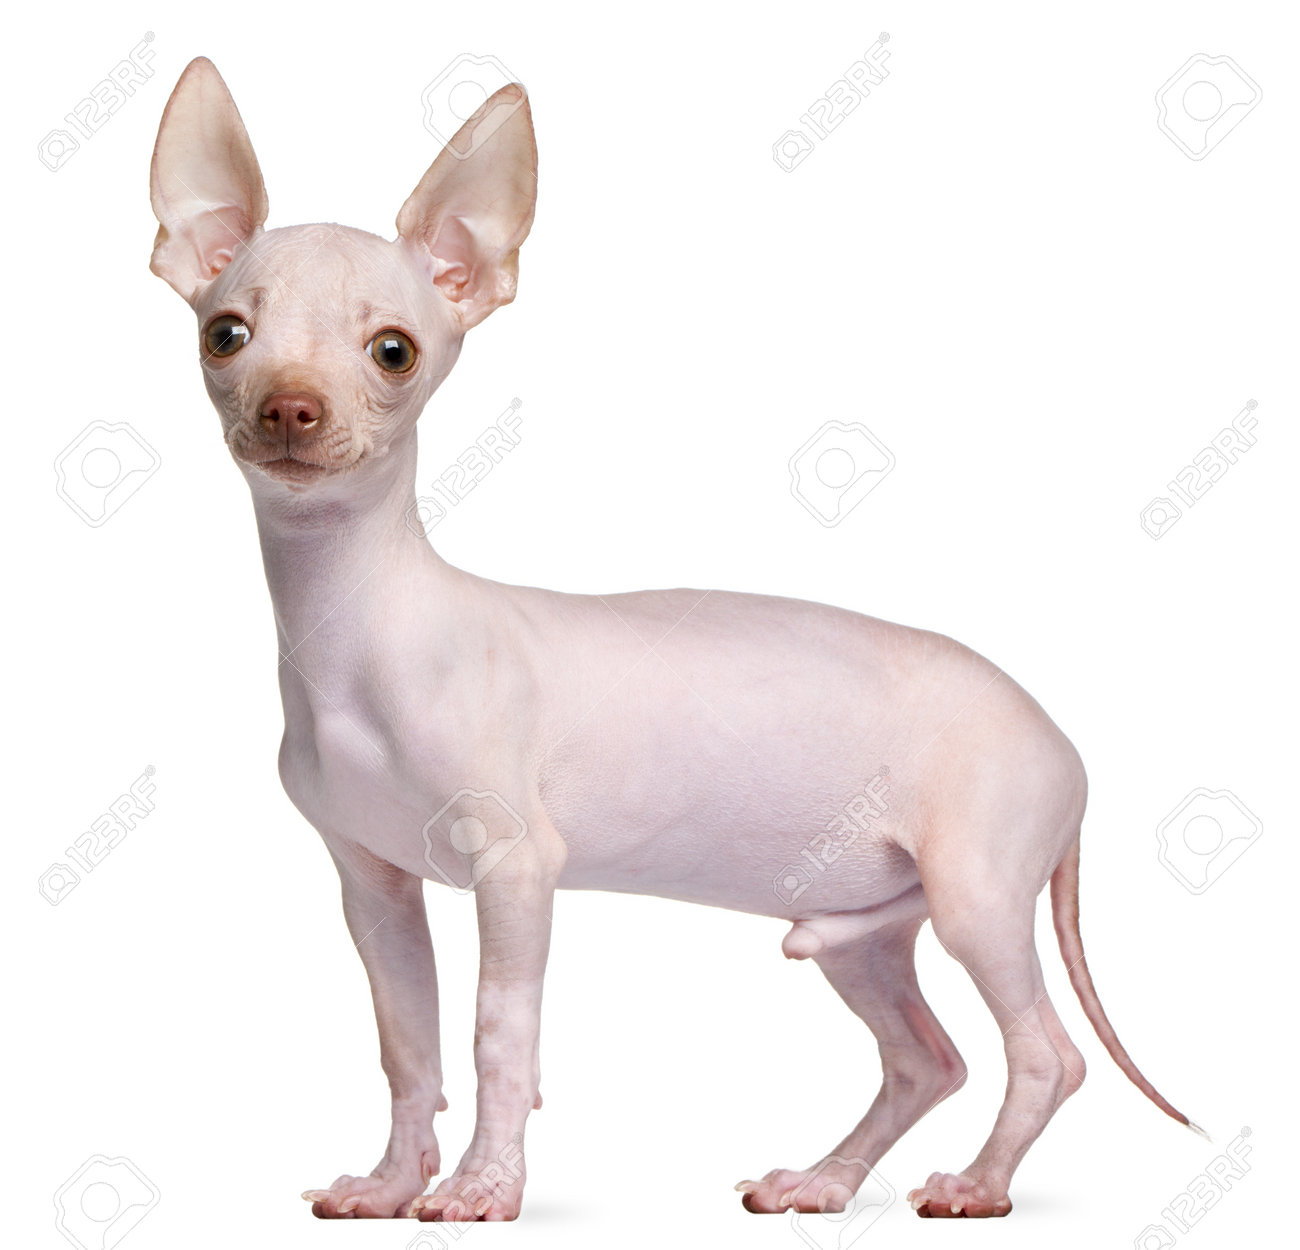 9161879-hairless-chihuahua-5-months-old-standing-in-front-of-white-background.jpg